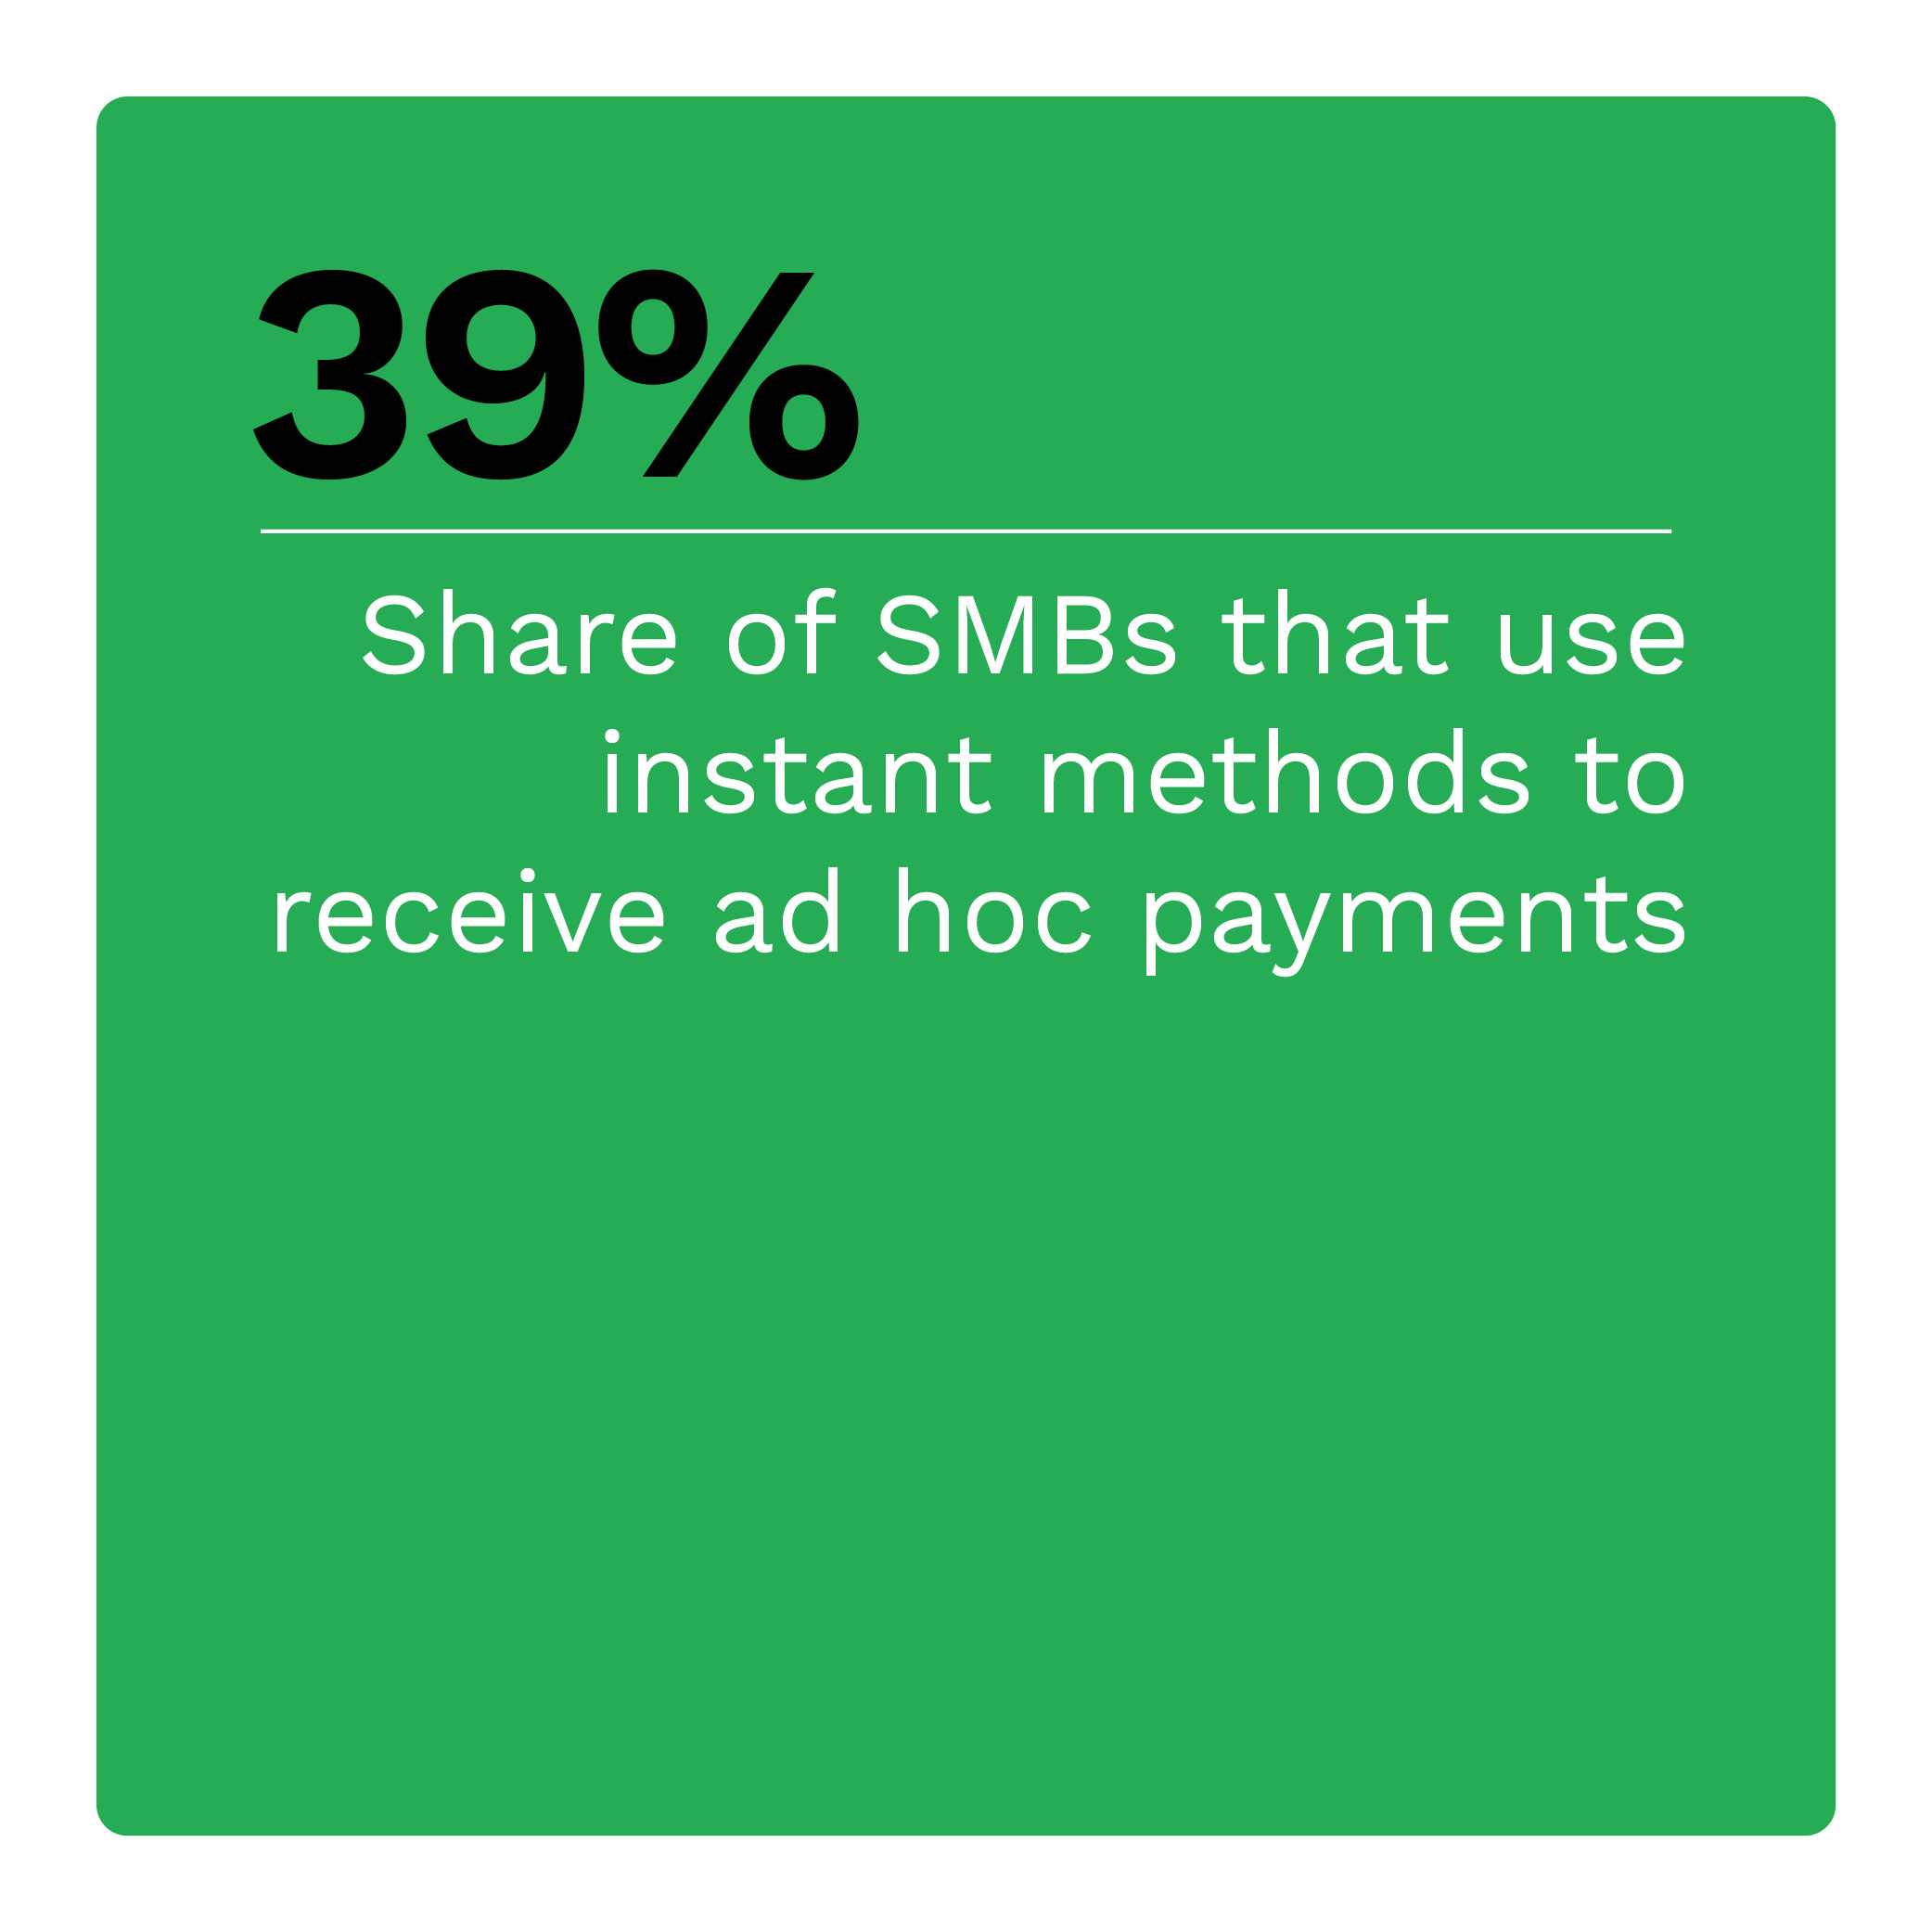  Share of SMBs that use instant methods to receive ad hoc payments